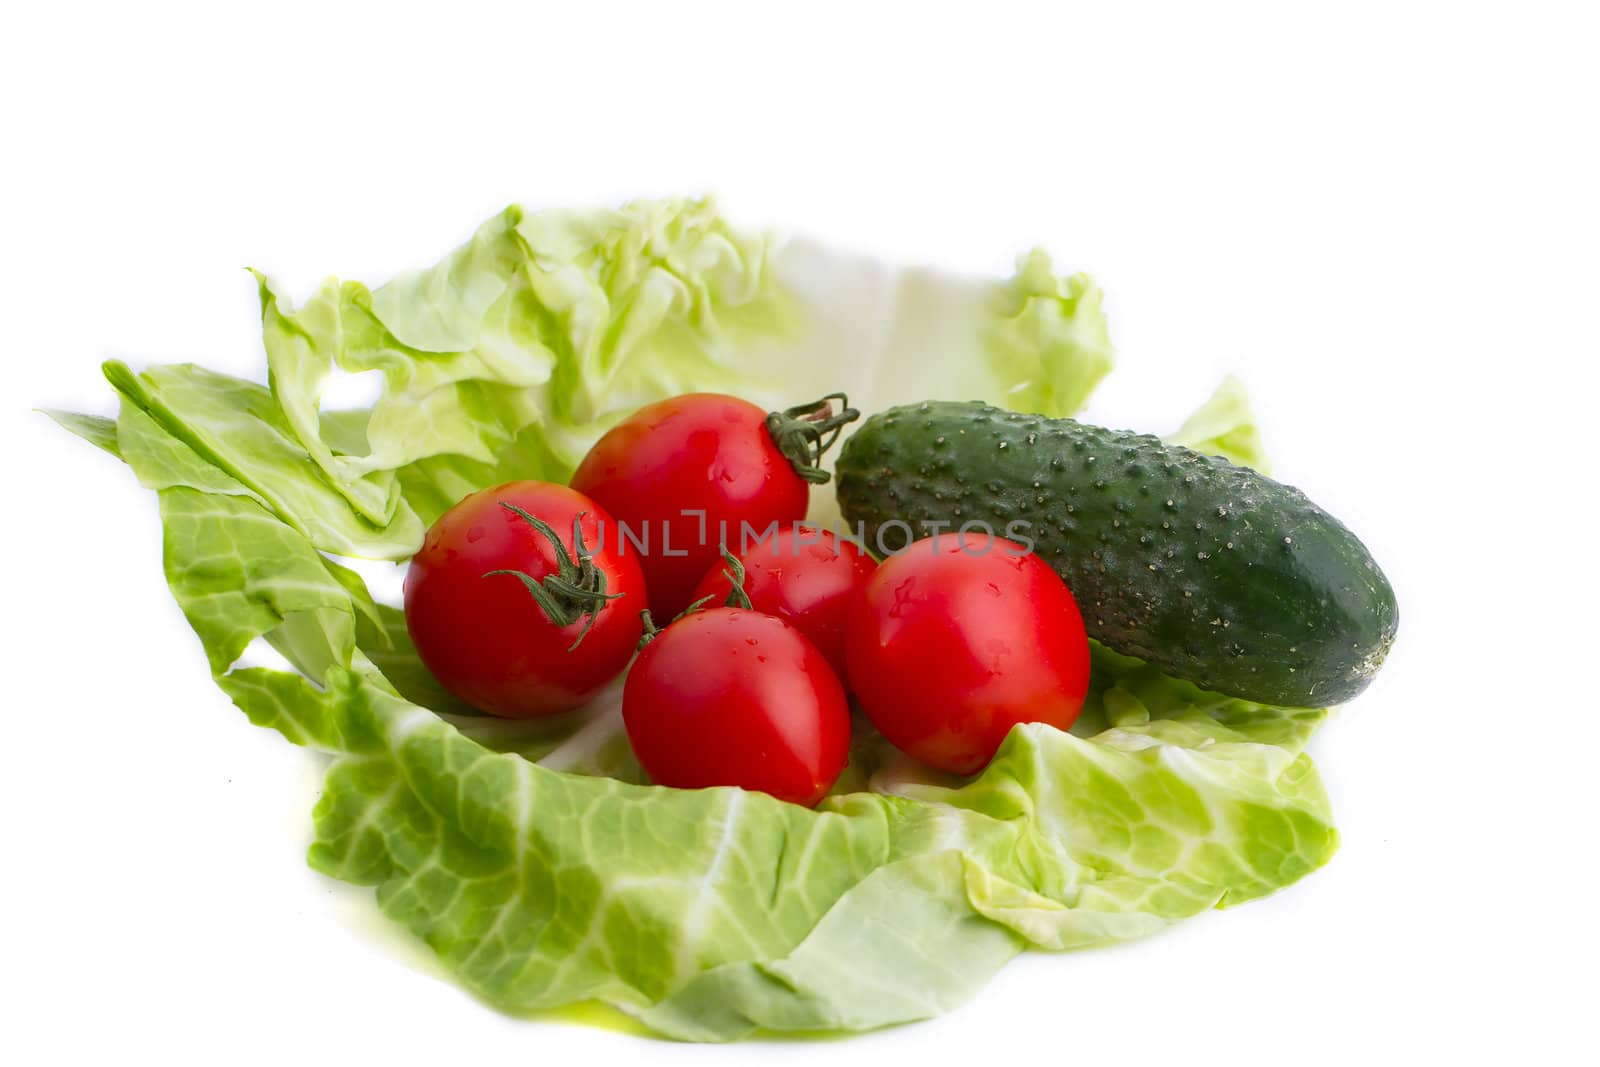 Tomatoes and cucumber are in the cabbage leaf by victosha